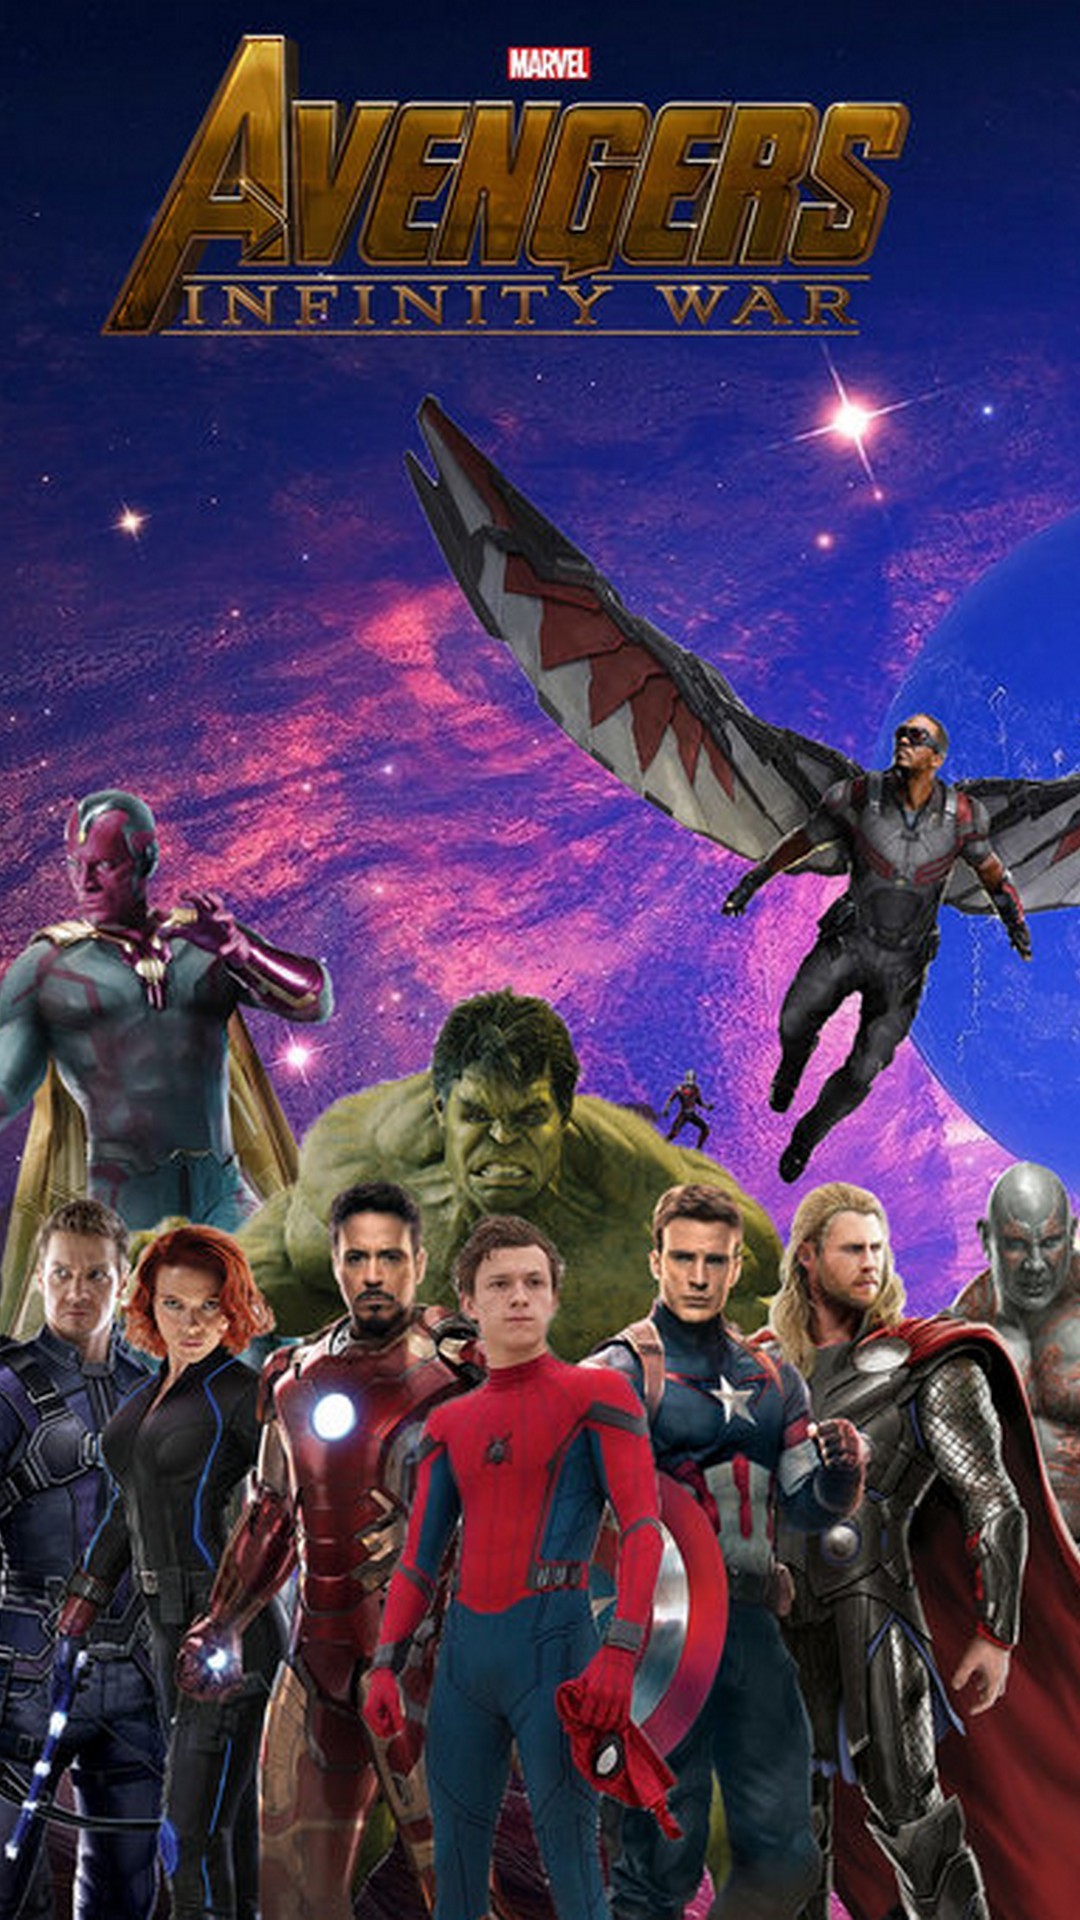 Avengers Infinity War Characters Android Wallpaper with HD resolution 1080x1920